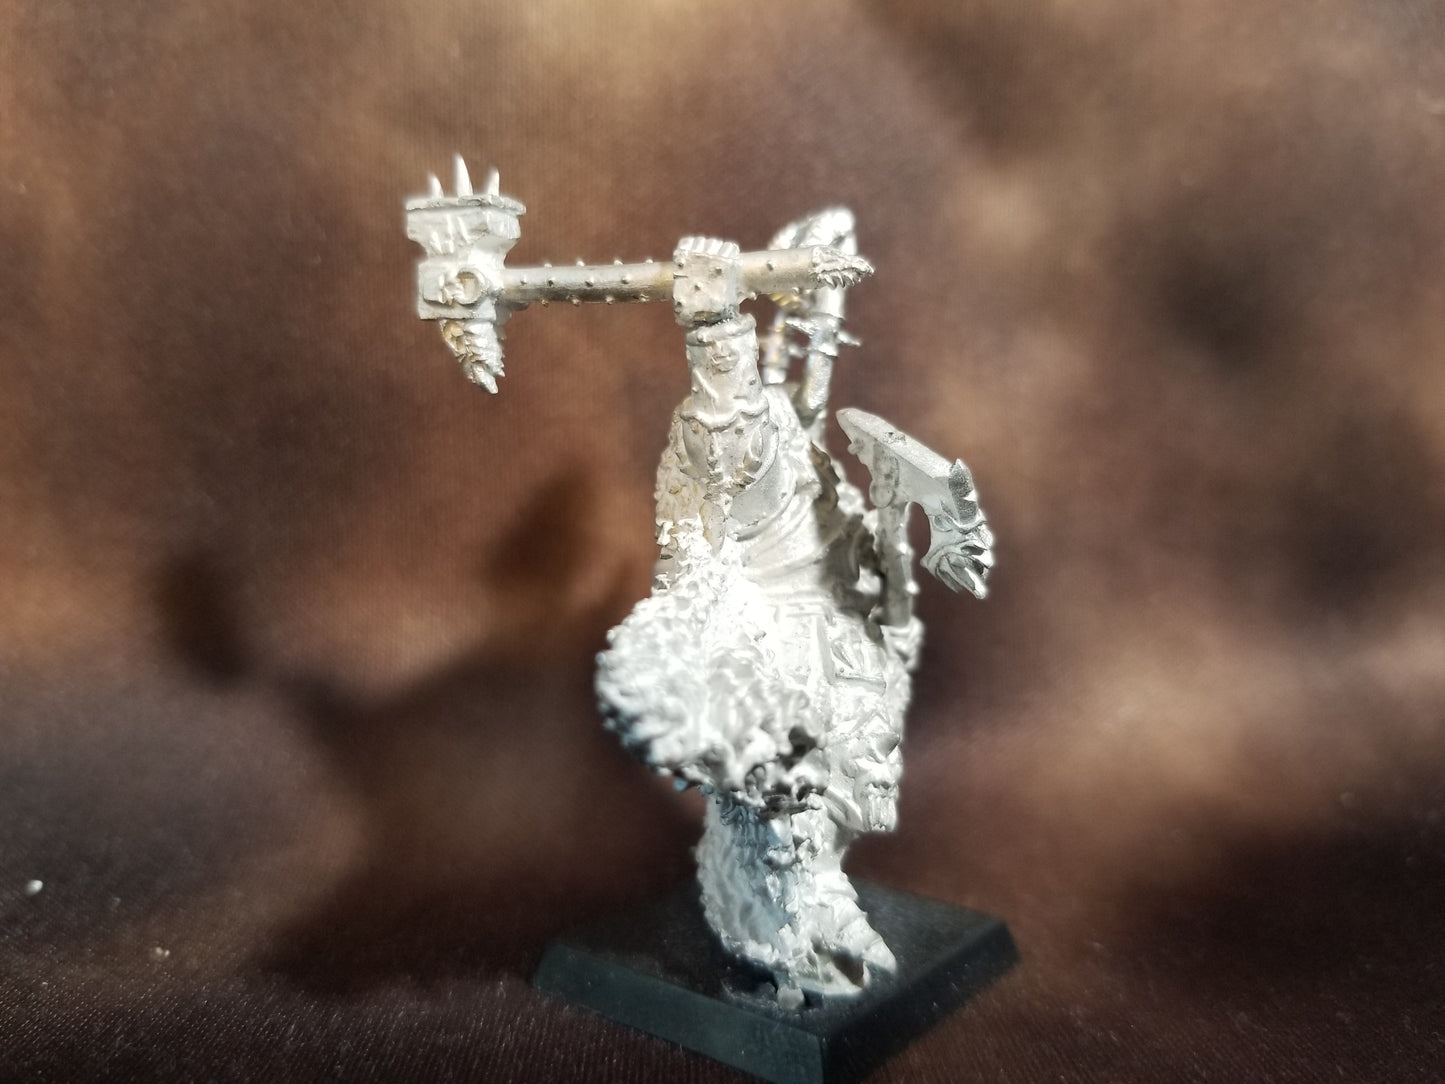 Warhammer Age of Sigmar AOS Chaos Lord on Foot Metal